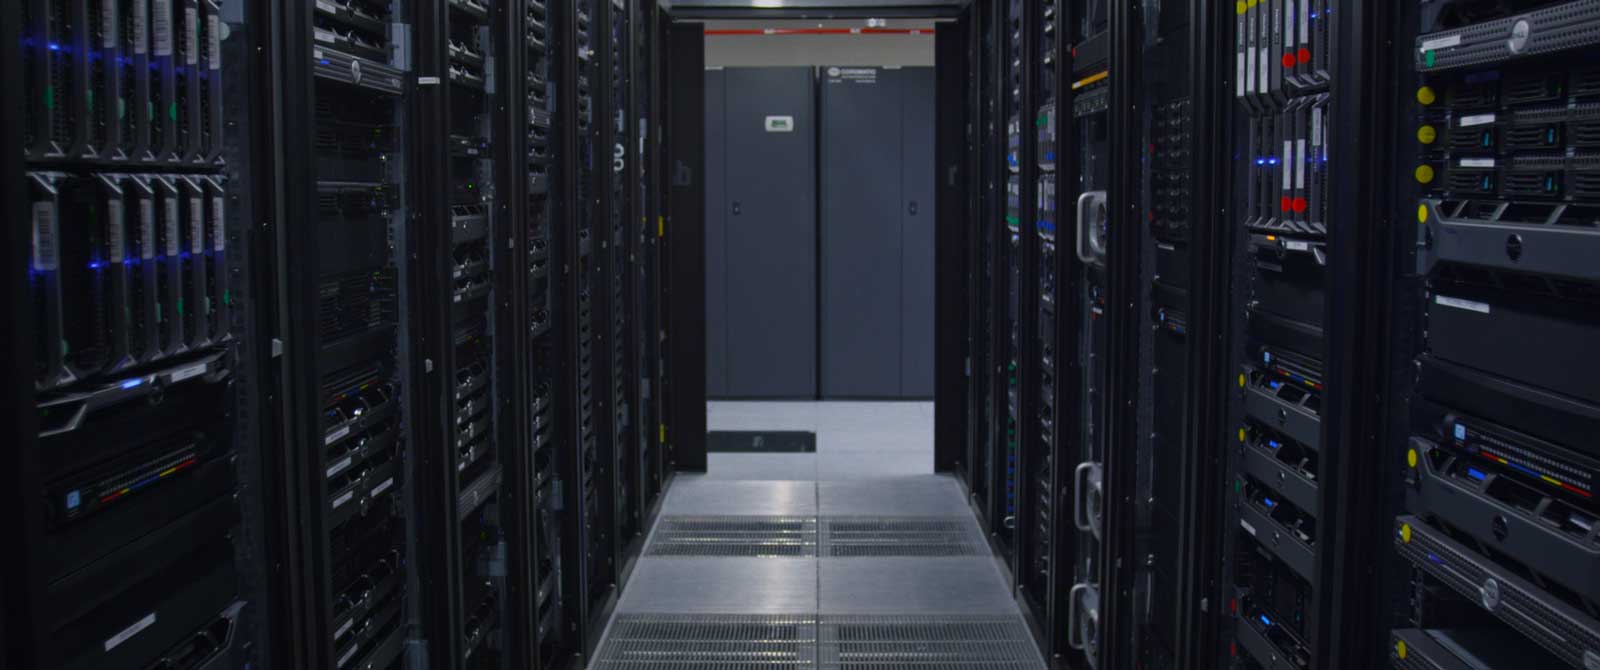 a server room or data storage that can provide data for increasing supply chain visibility